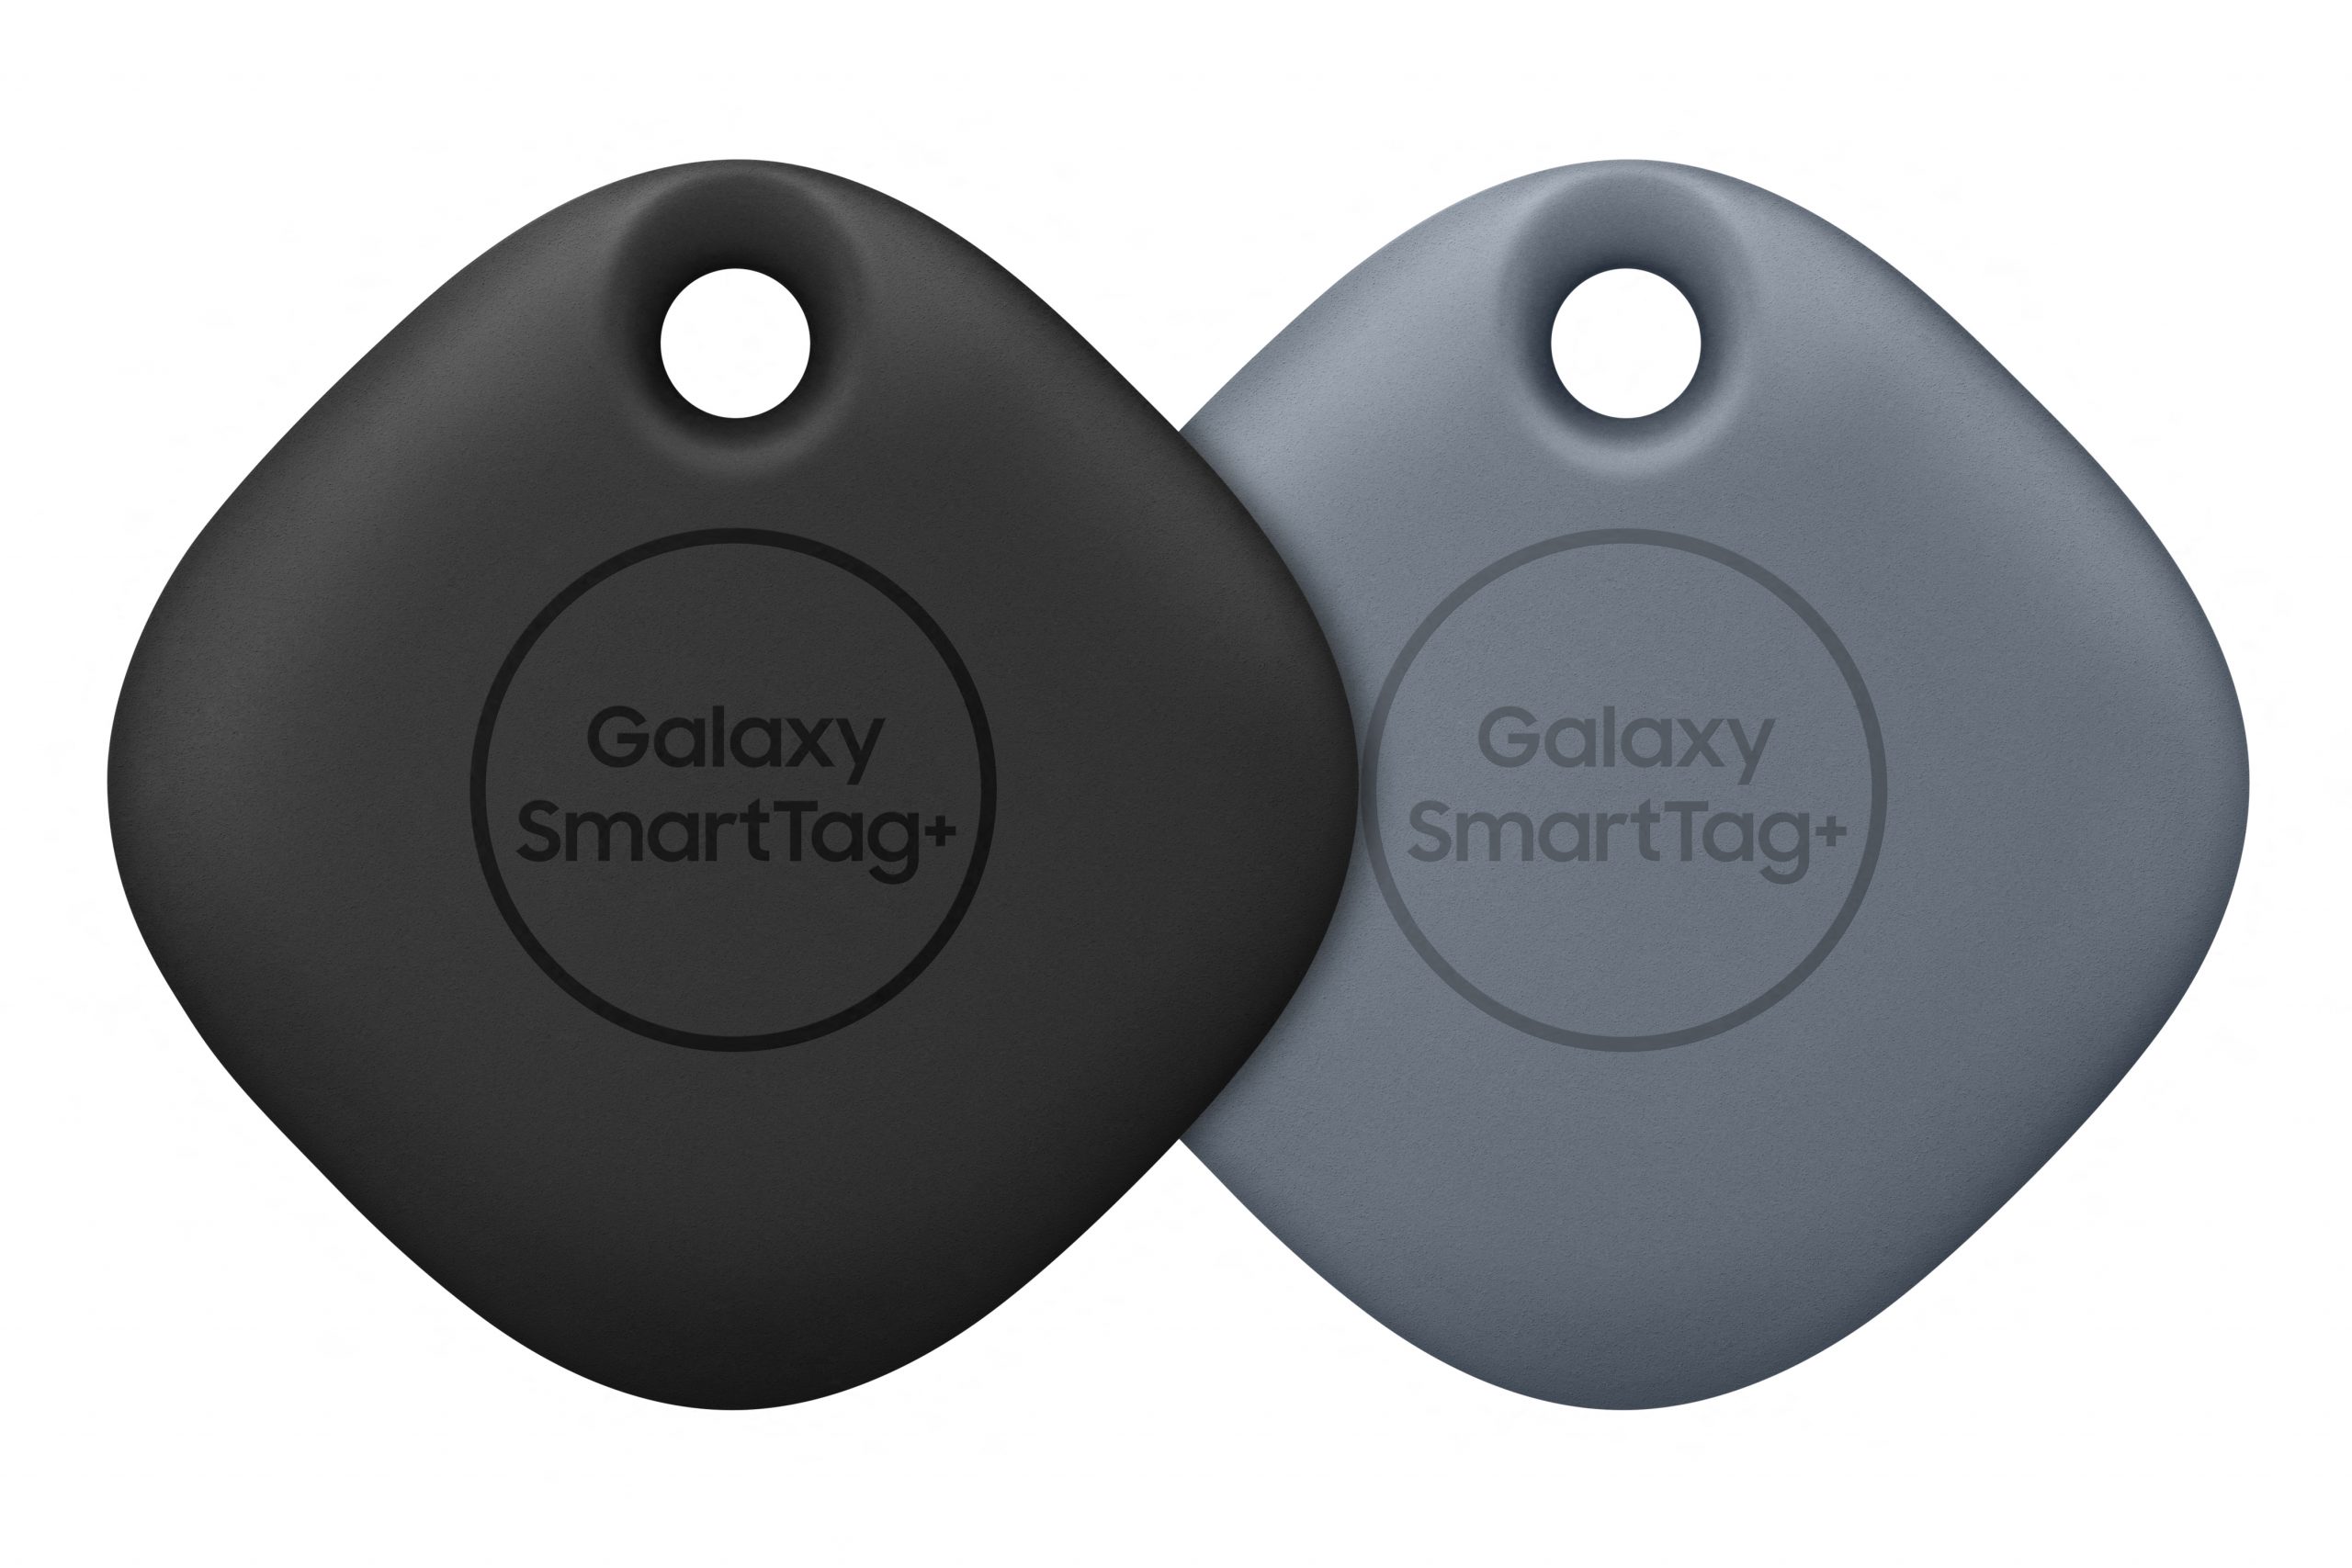 [Update] Introducing the New Galaxy SmartTag+ The Smart Way to Find